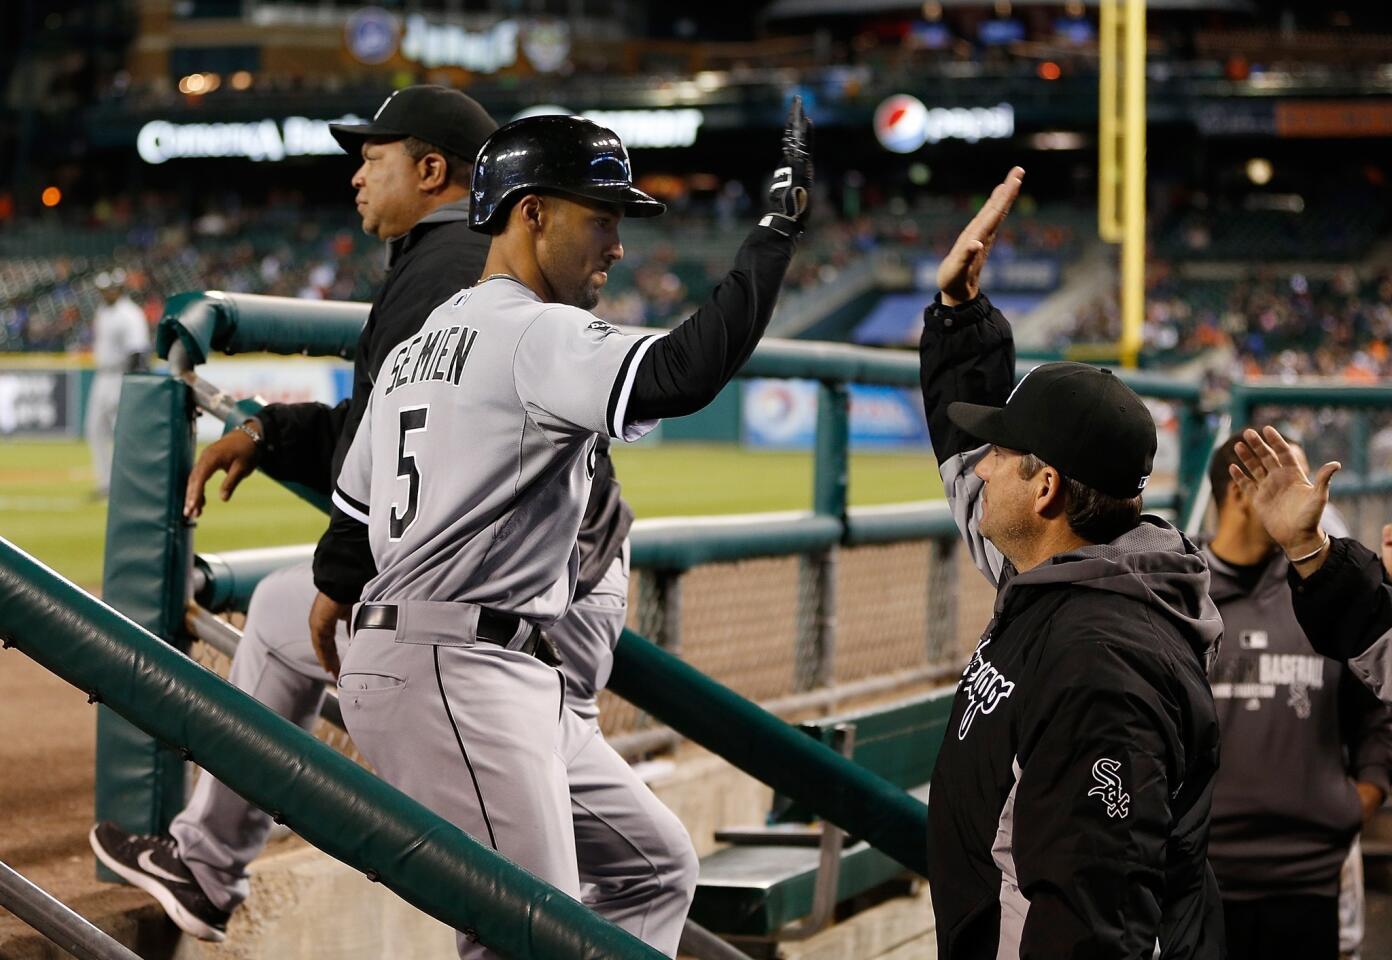 Marcus Semien celebrates his seventh inning grand slam with manager Robin Ventura.